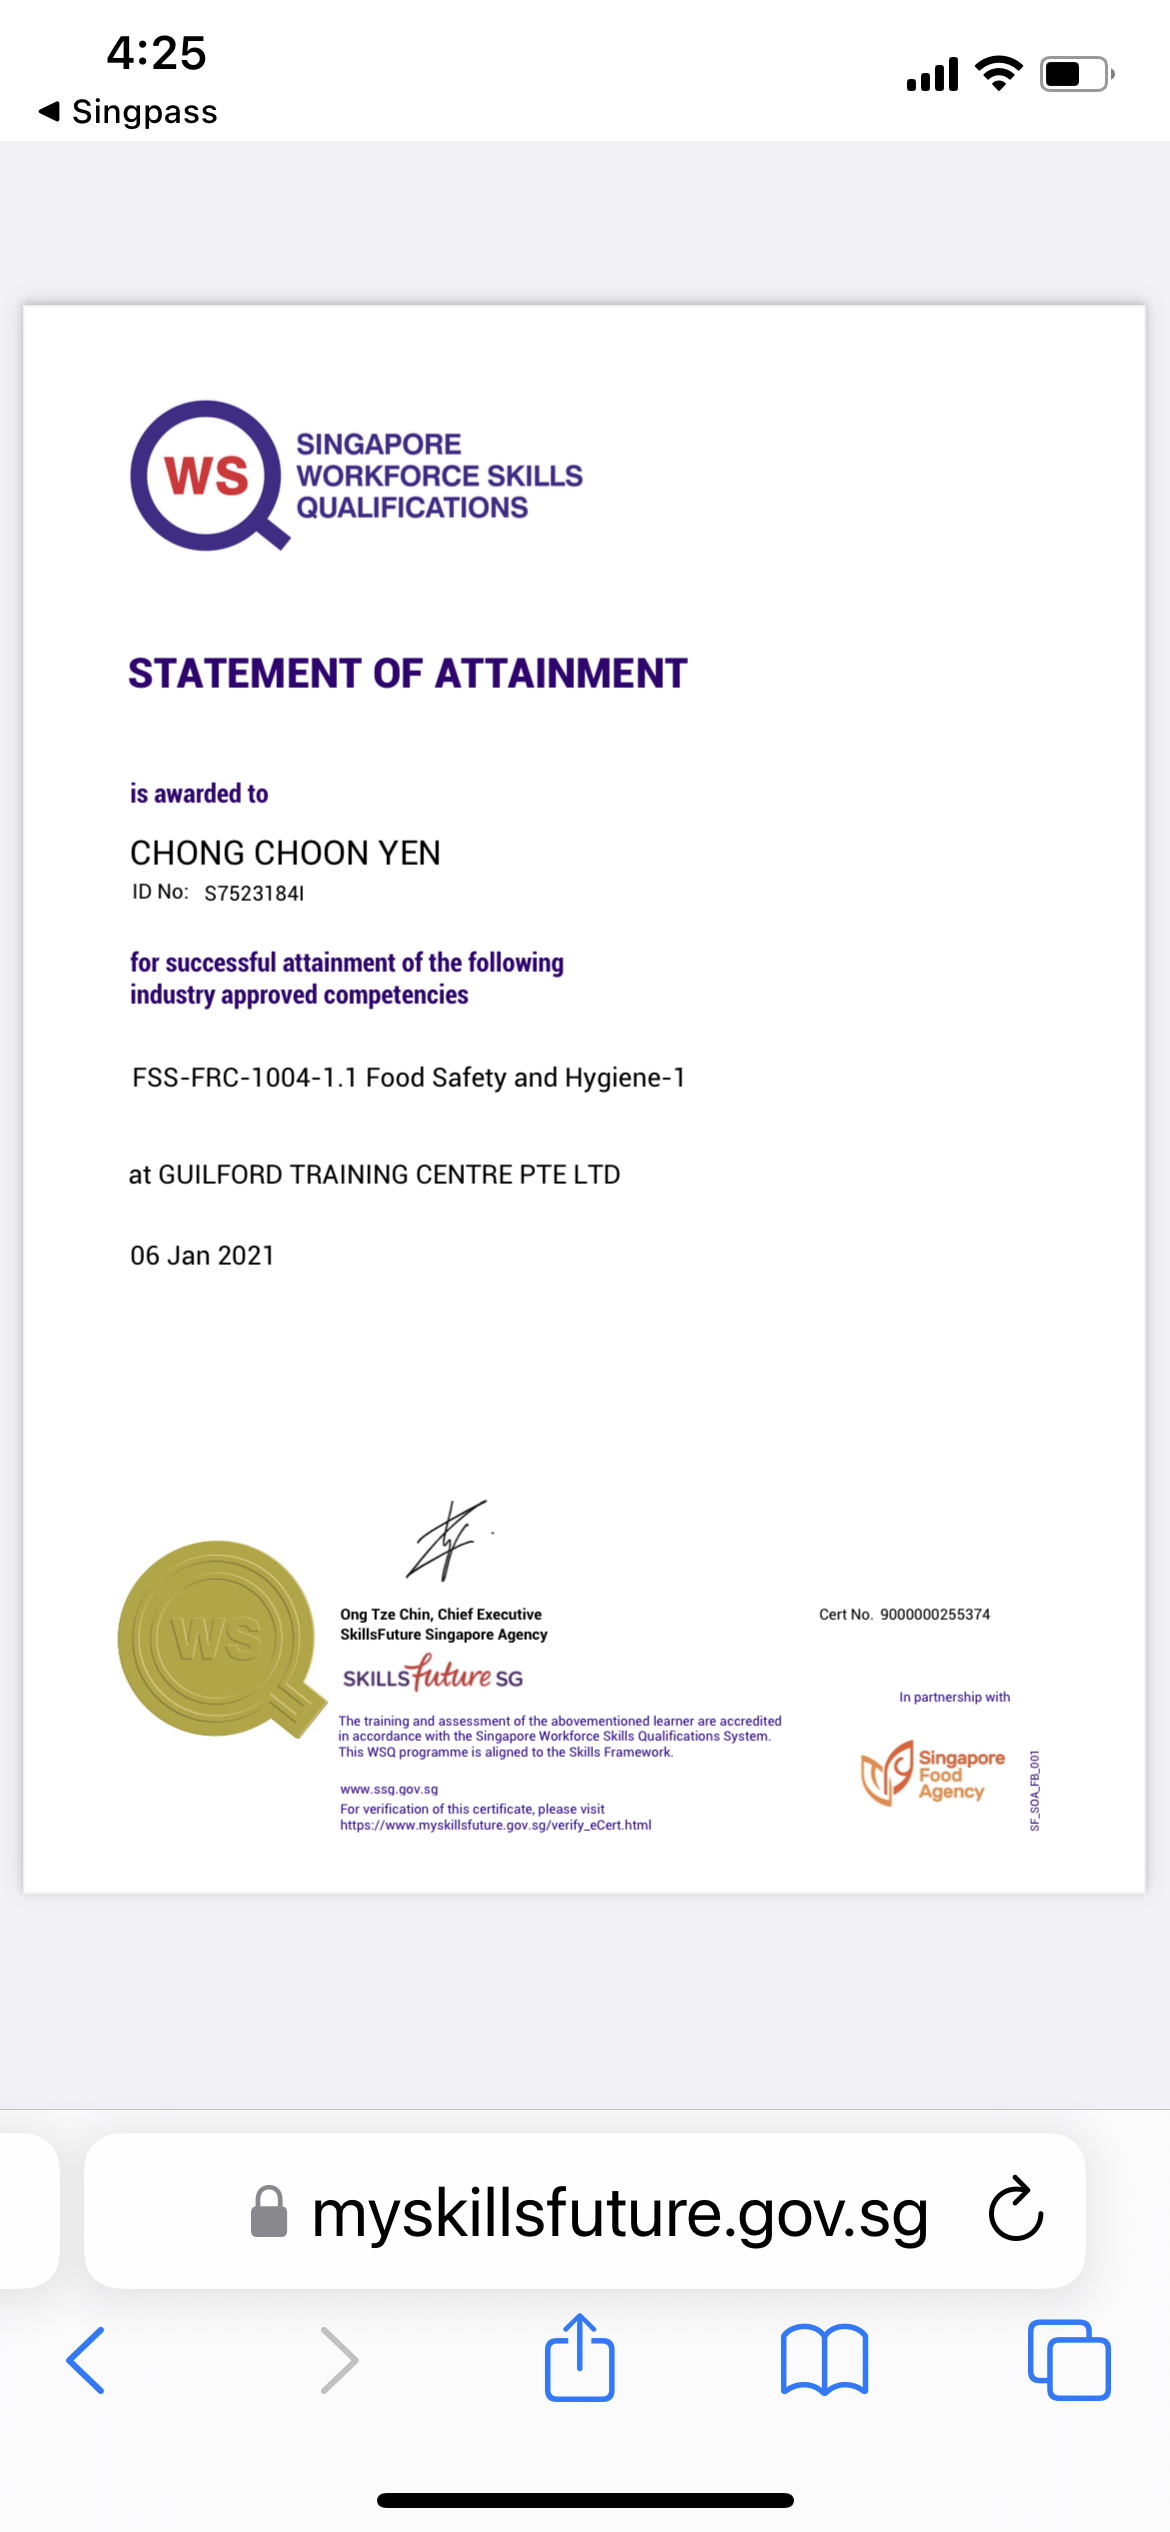 4:25

4 Singpass

al FT @)

SINGAPORE
WORKFORCE SKILLS
QUALIFICATIONS

STATEMENT OF ATTAINMENT

is awarded to

CHONG CHOON YEN

ID No: §75231841

for successful attainment of the following
industry approved competencies

FSS-FRC-1004-1.1 Food Safety and Hygiene-1

at GUILFORD TRAINING CENTRE PTE LTD

06 Jan 2021

#

Ong Tze Chin, Chief Executive Cert No. 9000000256374
SkillsF uture Singapore Agency

SKILLS SG

In partner shep with

 

The tramung and assessment of the sbovementoned learner are accredited
1 accordance wih the Singapore Workiorce Skills Quakfications System

Tos WS ogame 5 seped 1 the Sums Framemor 4 Singapore
Fons

ru.001

www 33G Gov 50
For verification of thus certificate. please visit
Nitps./ were mysiilstuture Gov 3g/verify_eCert hrm

Agency

5.50

&amp; myskillsfuture.gov.sg C
&lt; Mh Mm